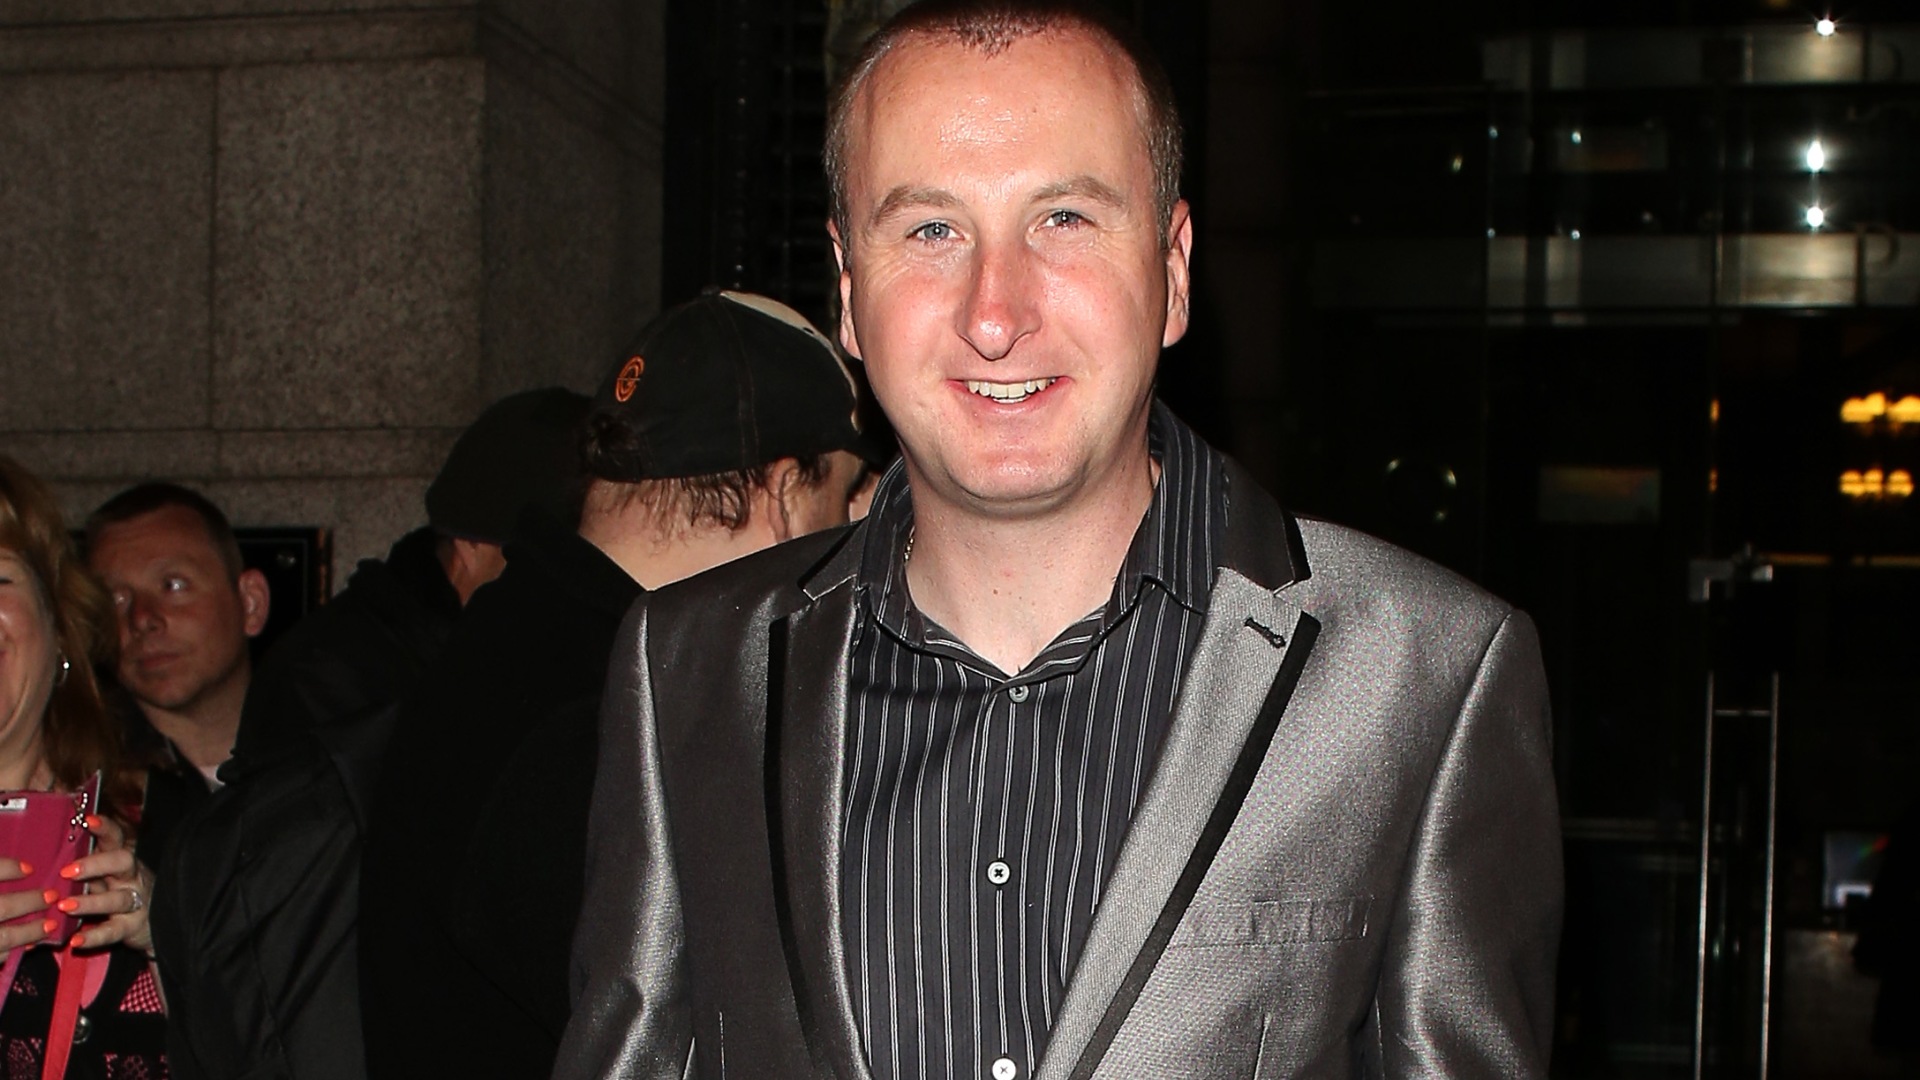 Andrew Whyment is married or not? – The US Sun